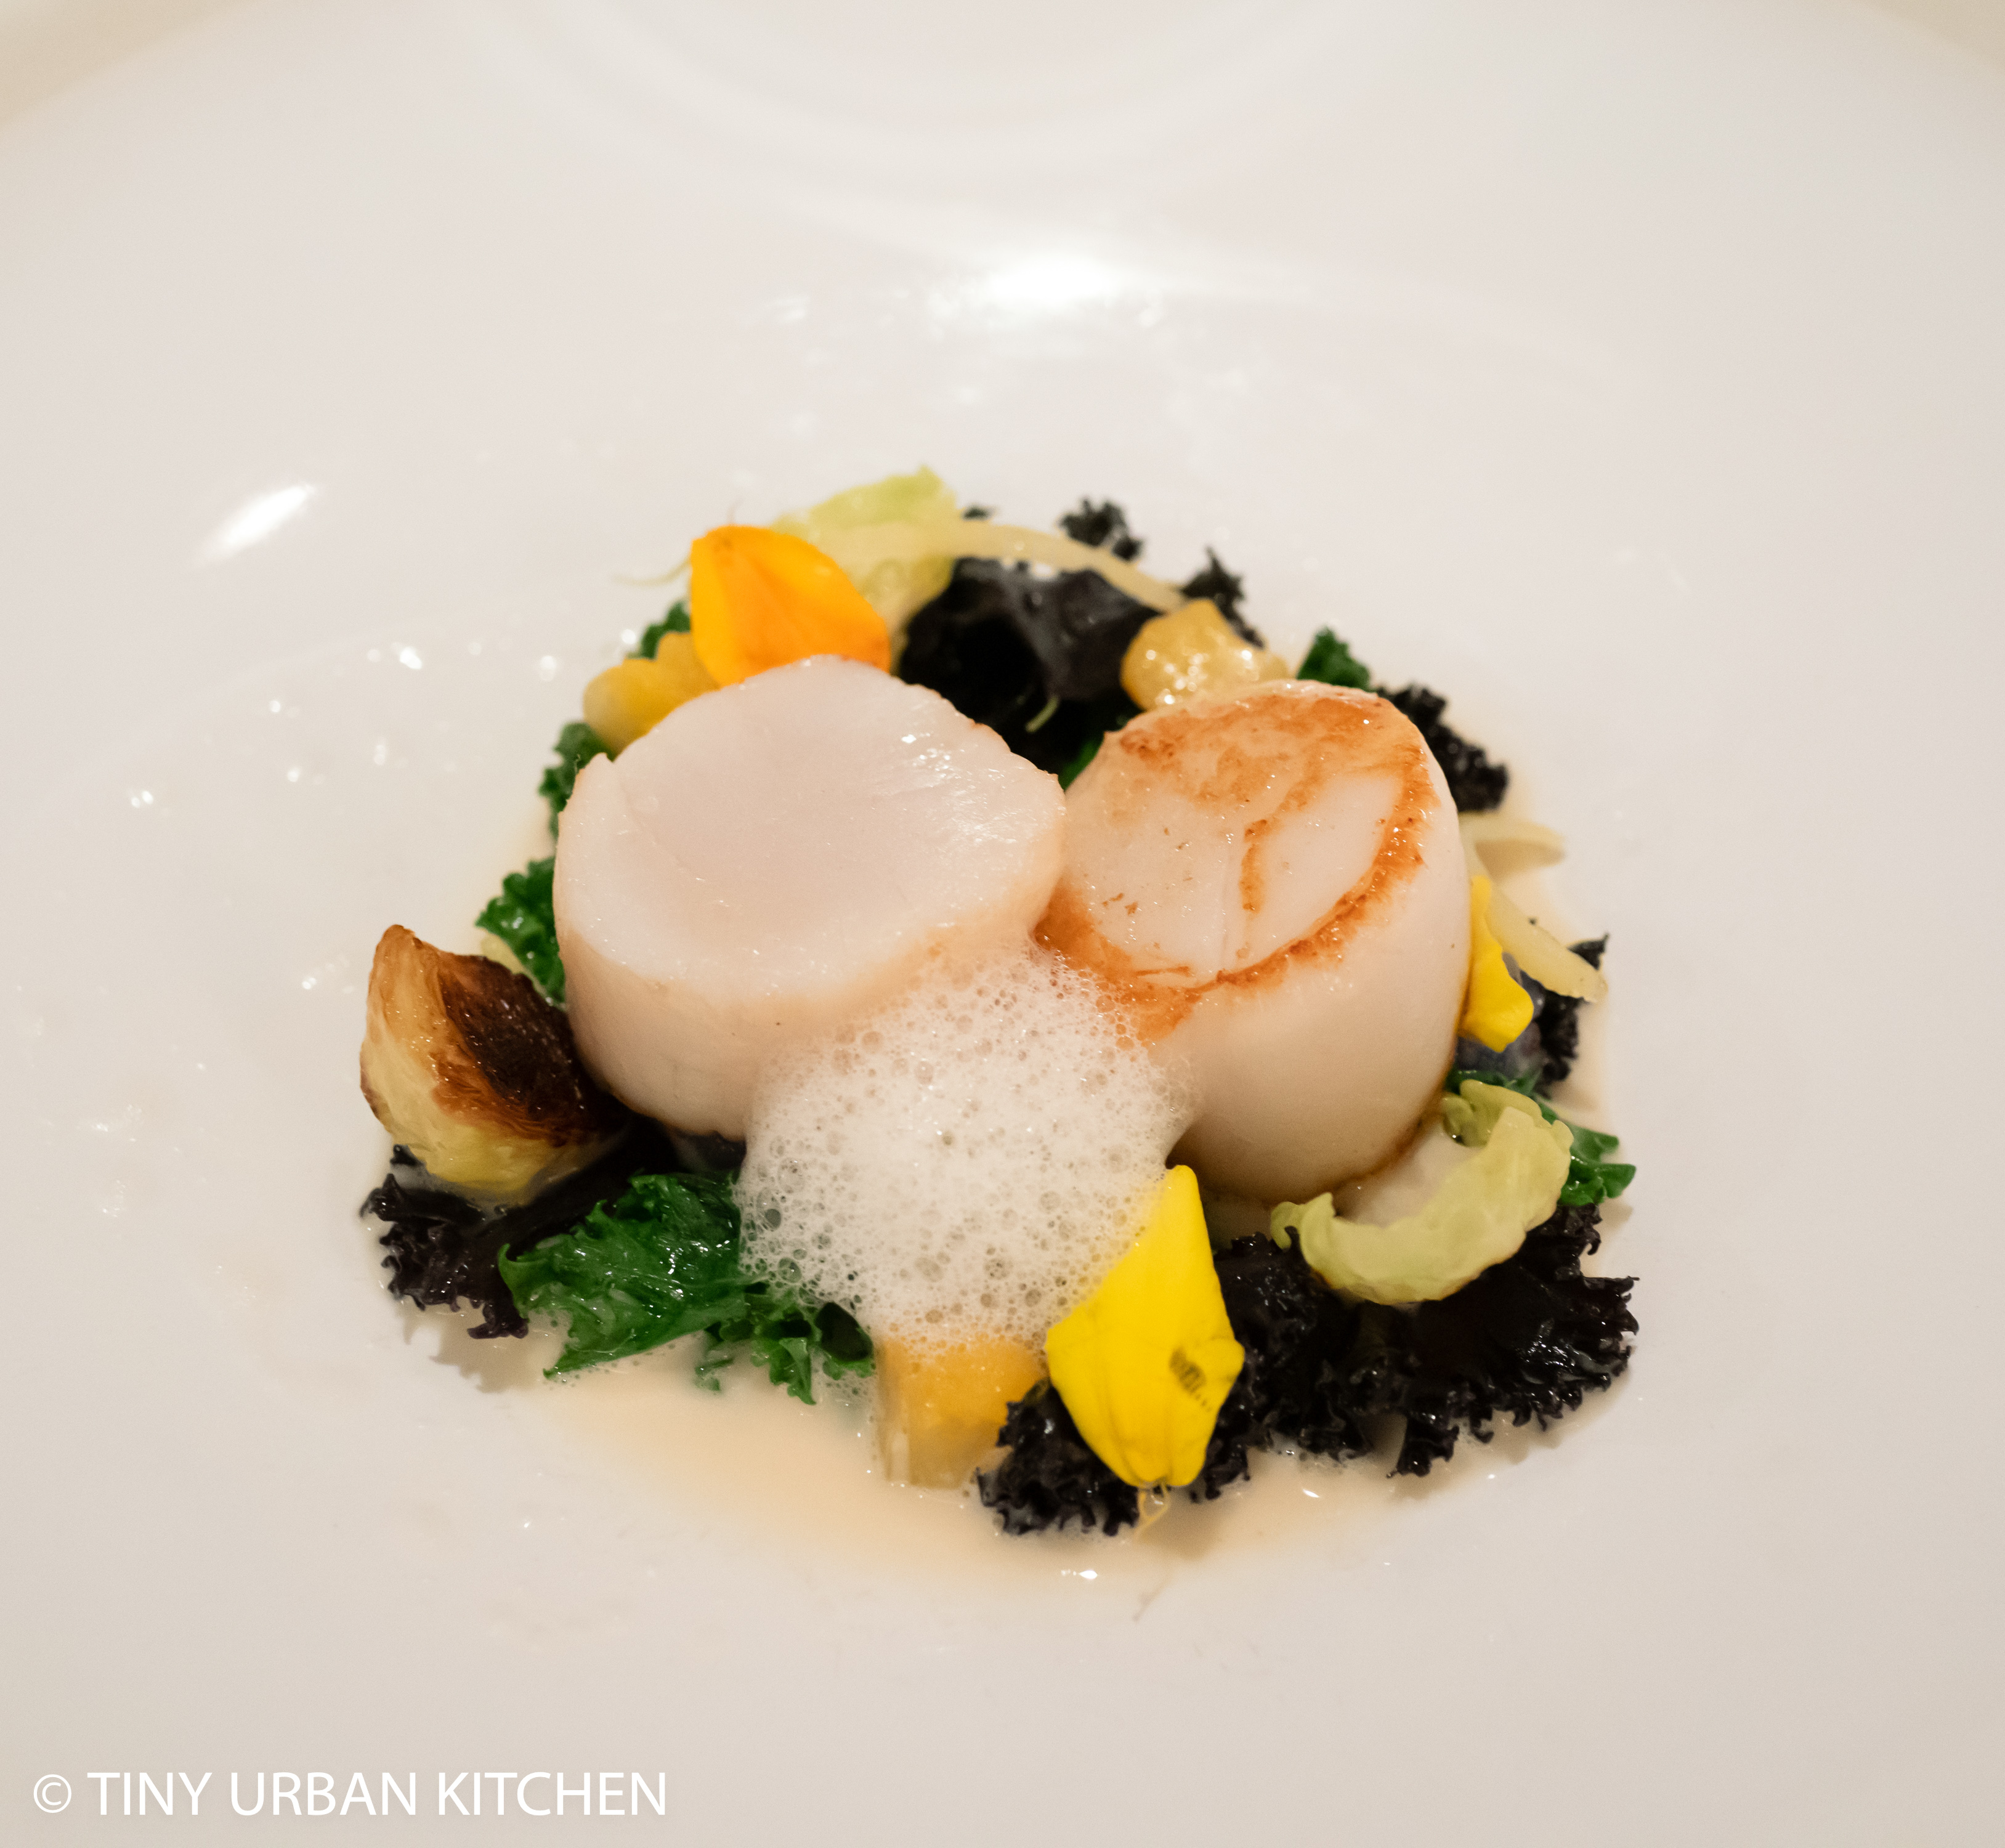 scallop nicely rare